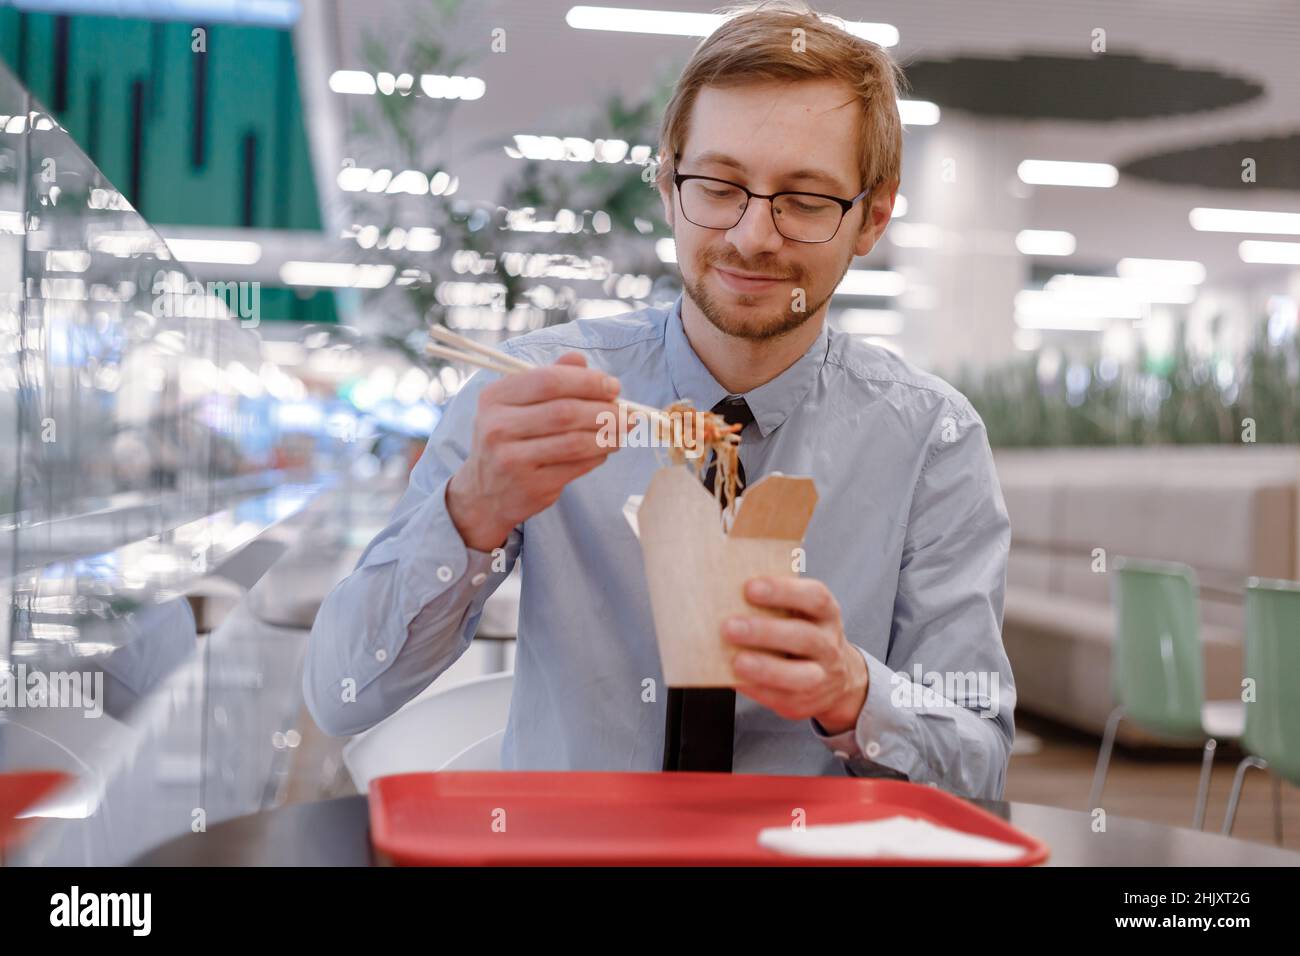 Hungry man trader in shirt eating chinese wok from box on food court. Lunch break. Stock Photo